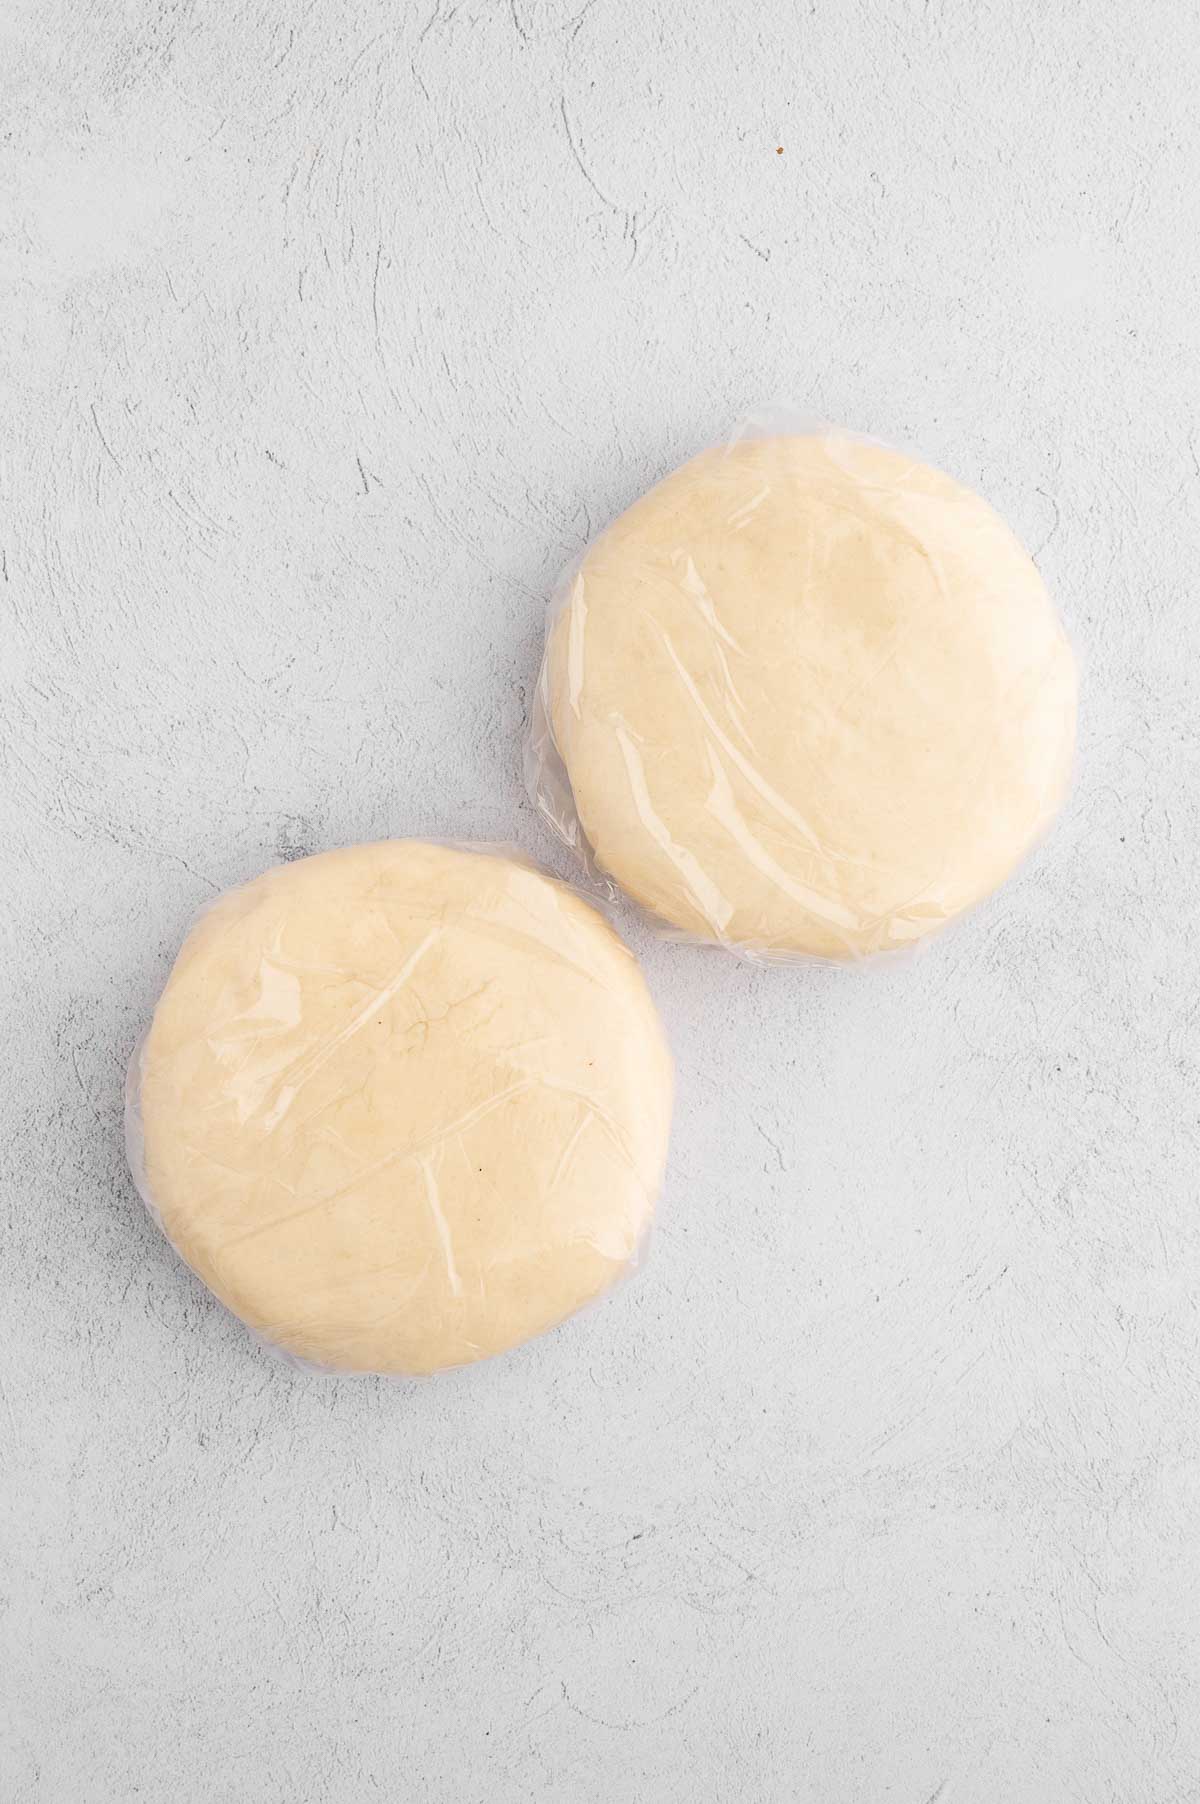 Each half of the vegan pie crust dough rolled and flattened into discs, then wrapped with plastic wrap.